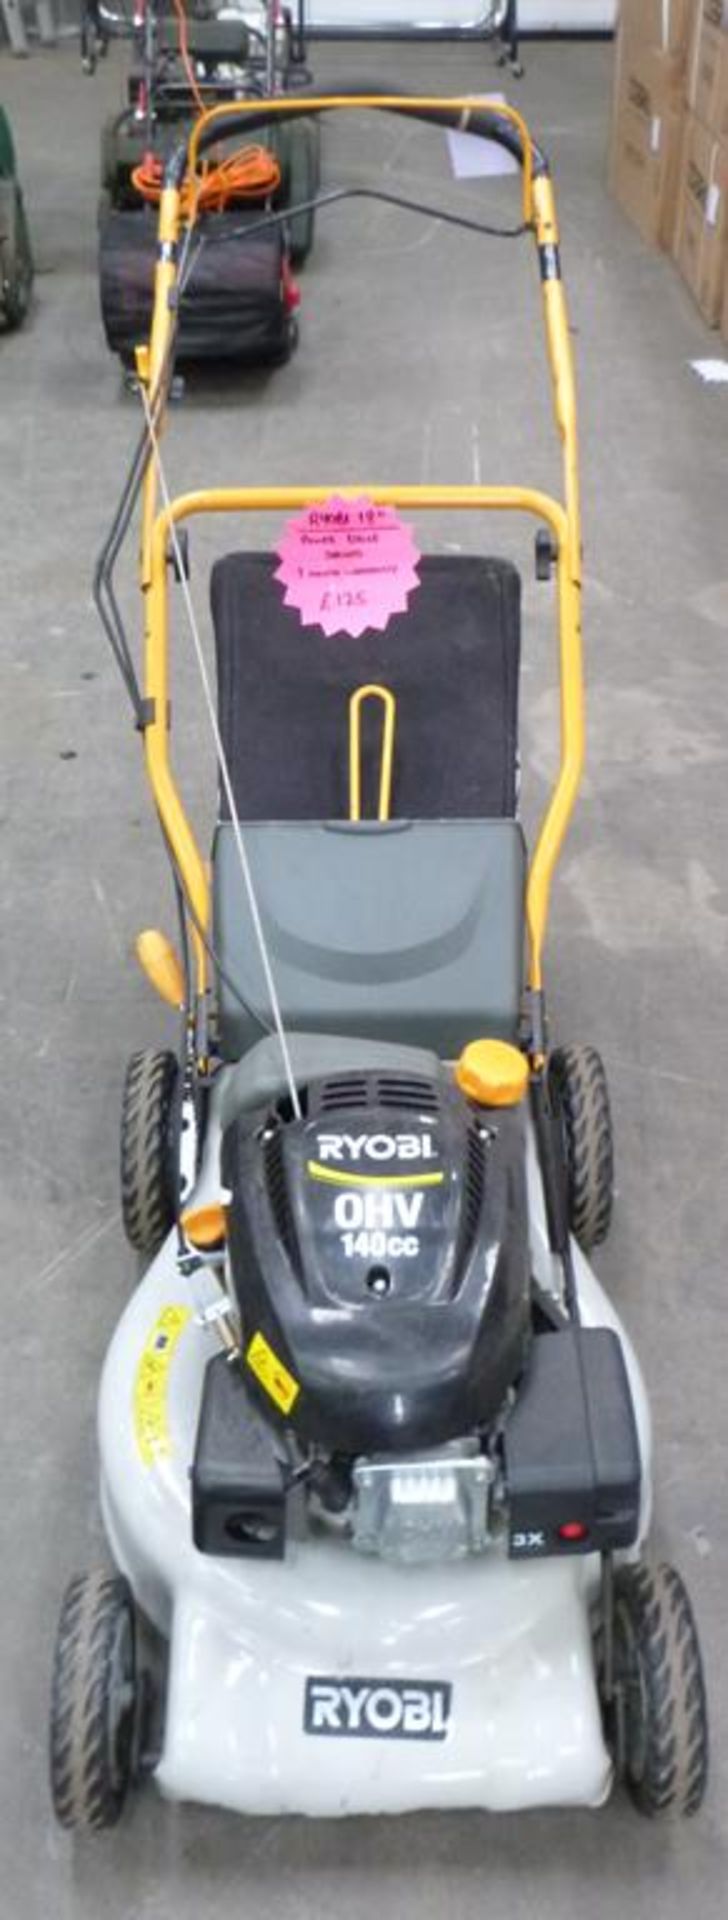 A Reconditioned Ryobi OHV 140cc Power Drive Rotary Lawnmower. Shop Price £125 - Image 3 of 3